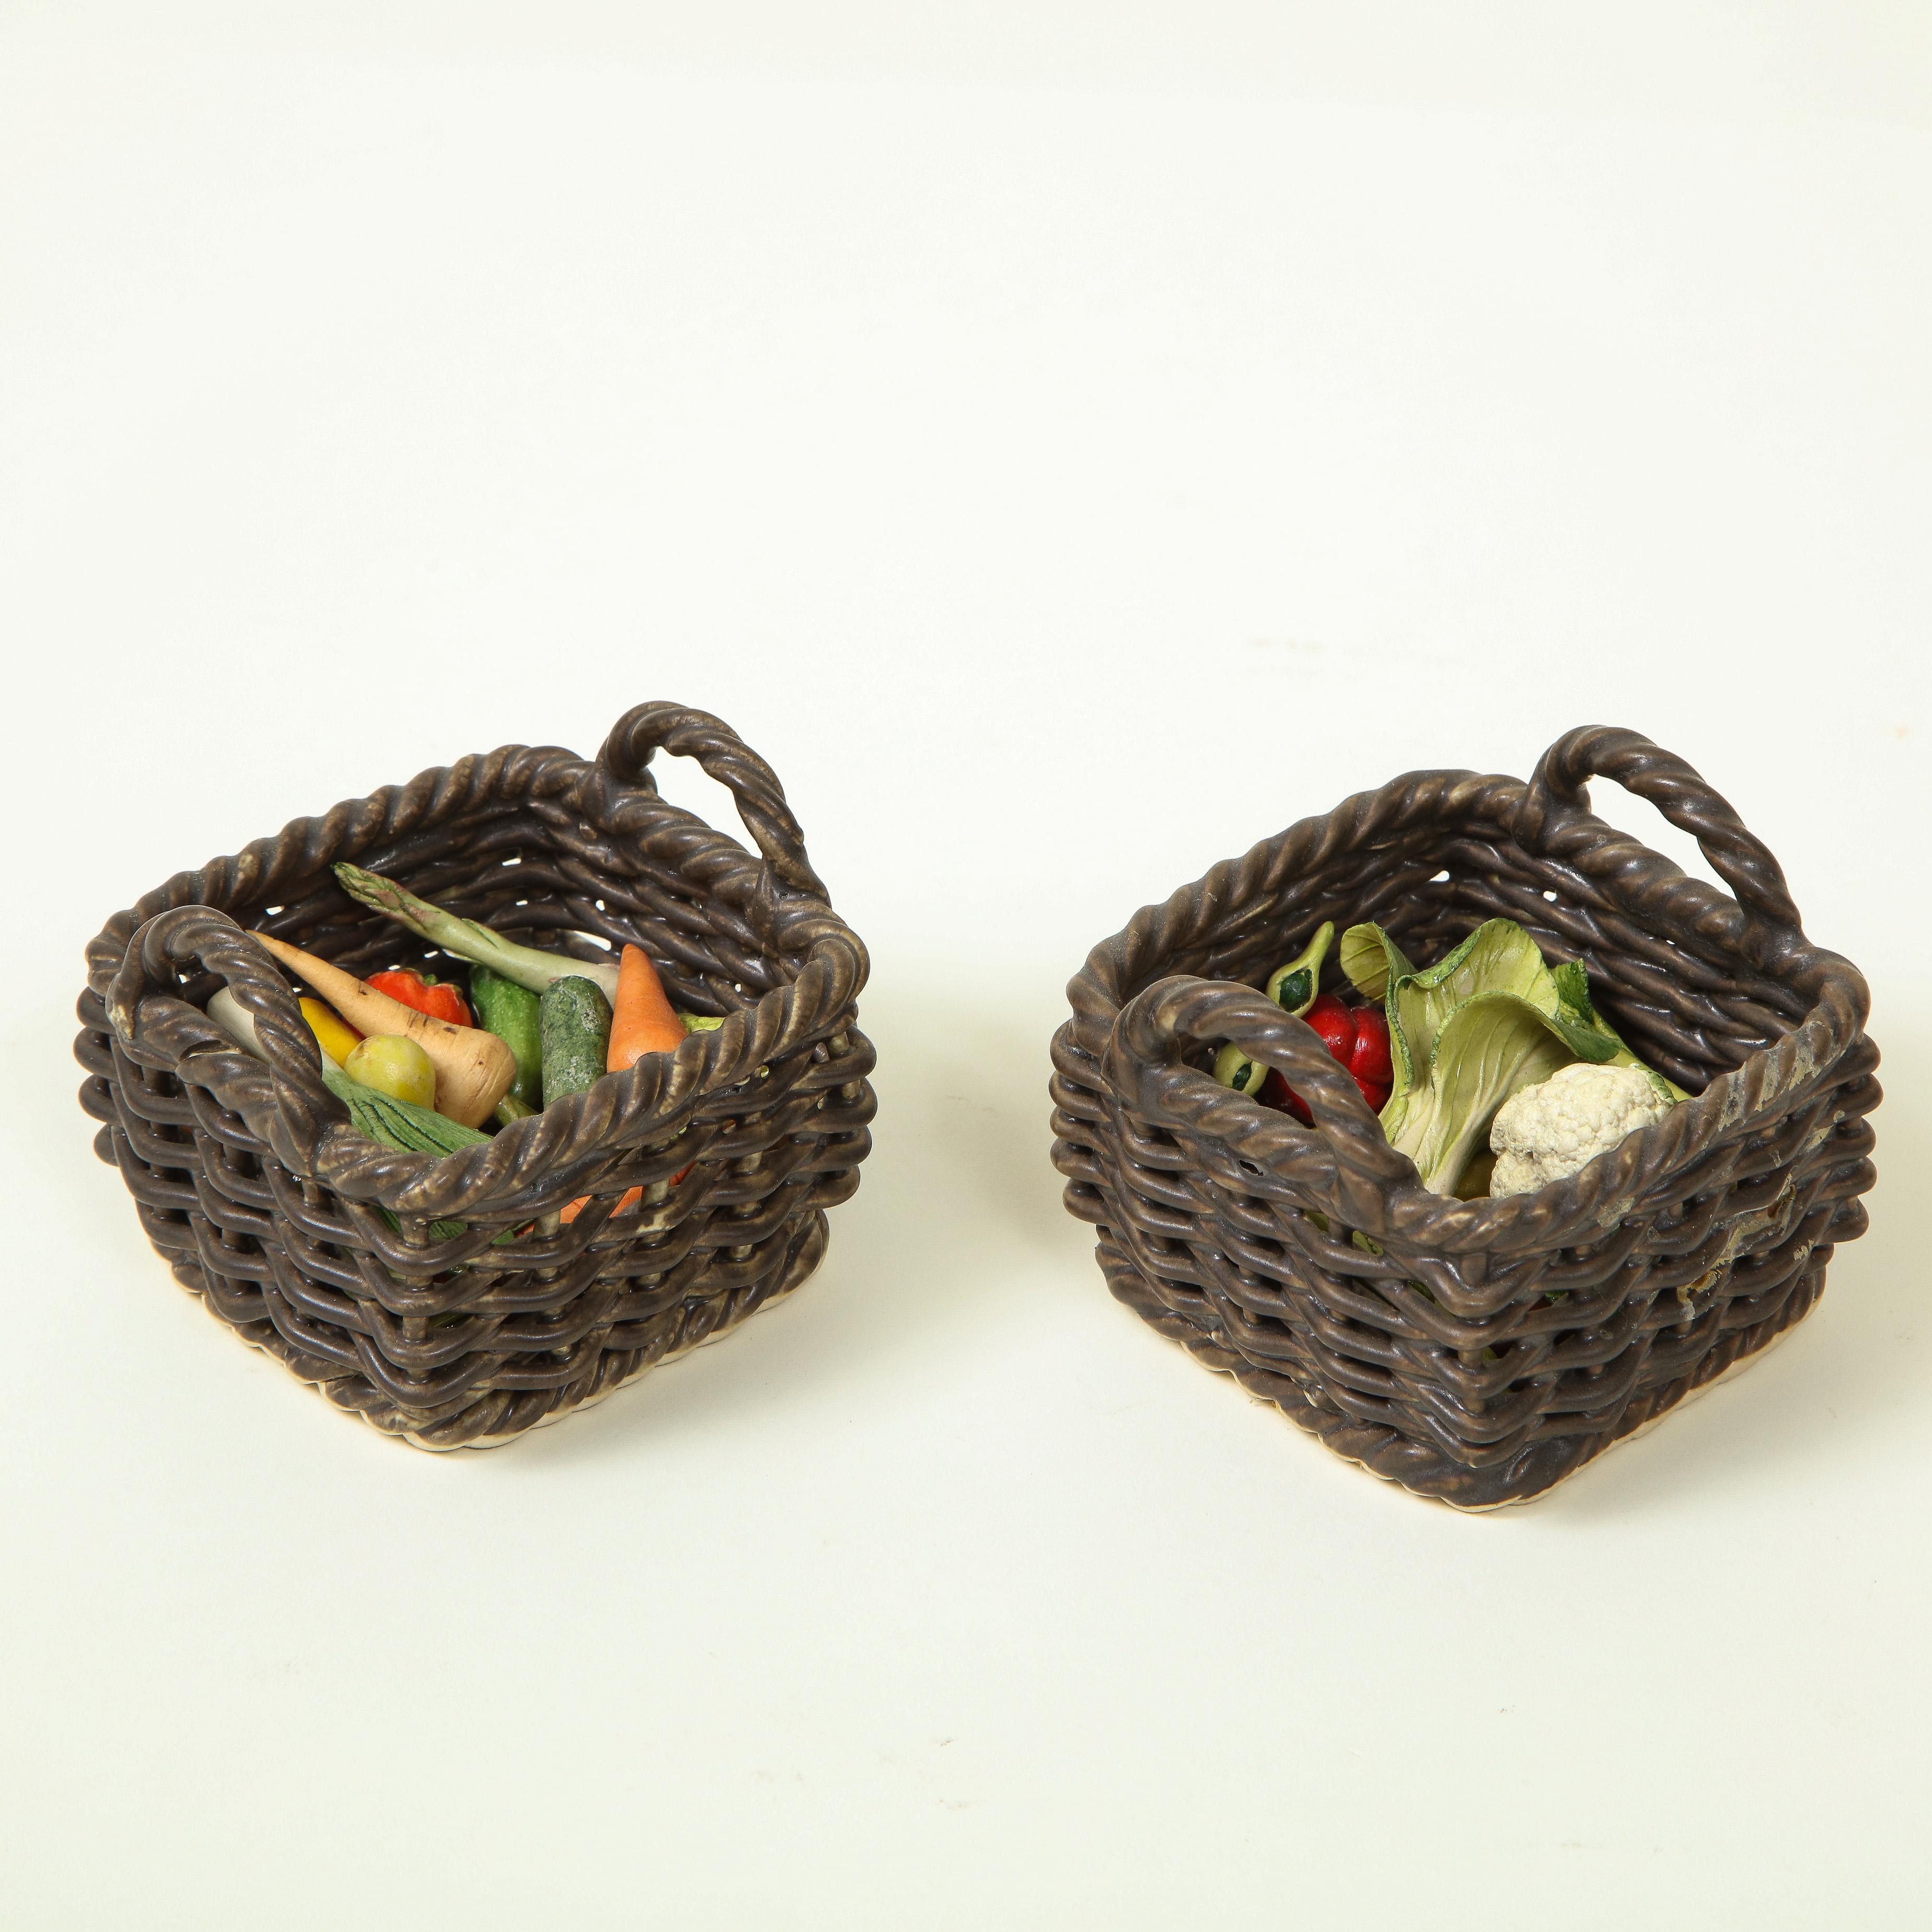 Miniature Pair of Ceramic Wicker Baskets with Vegetables 1